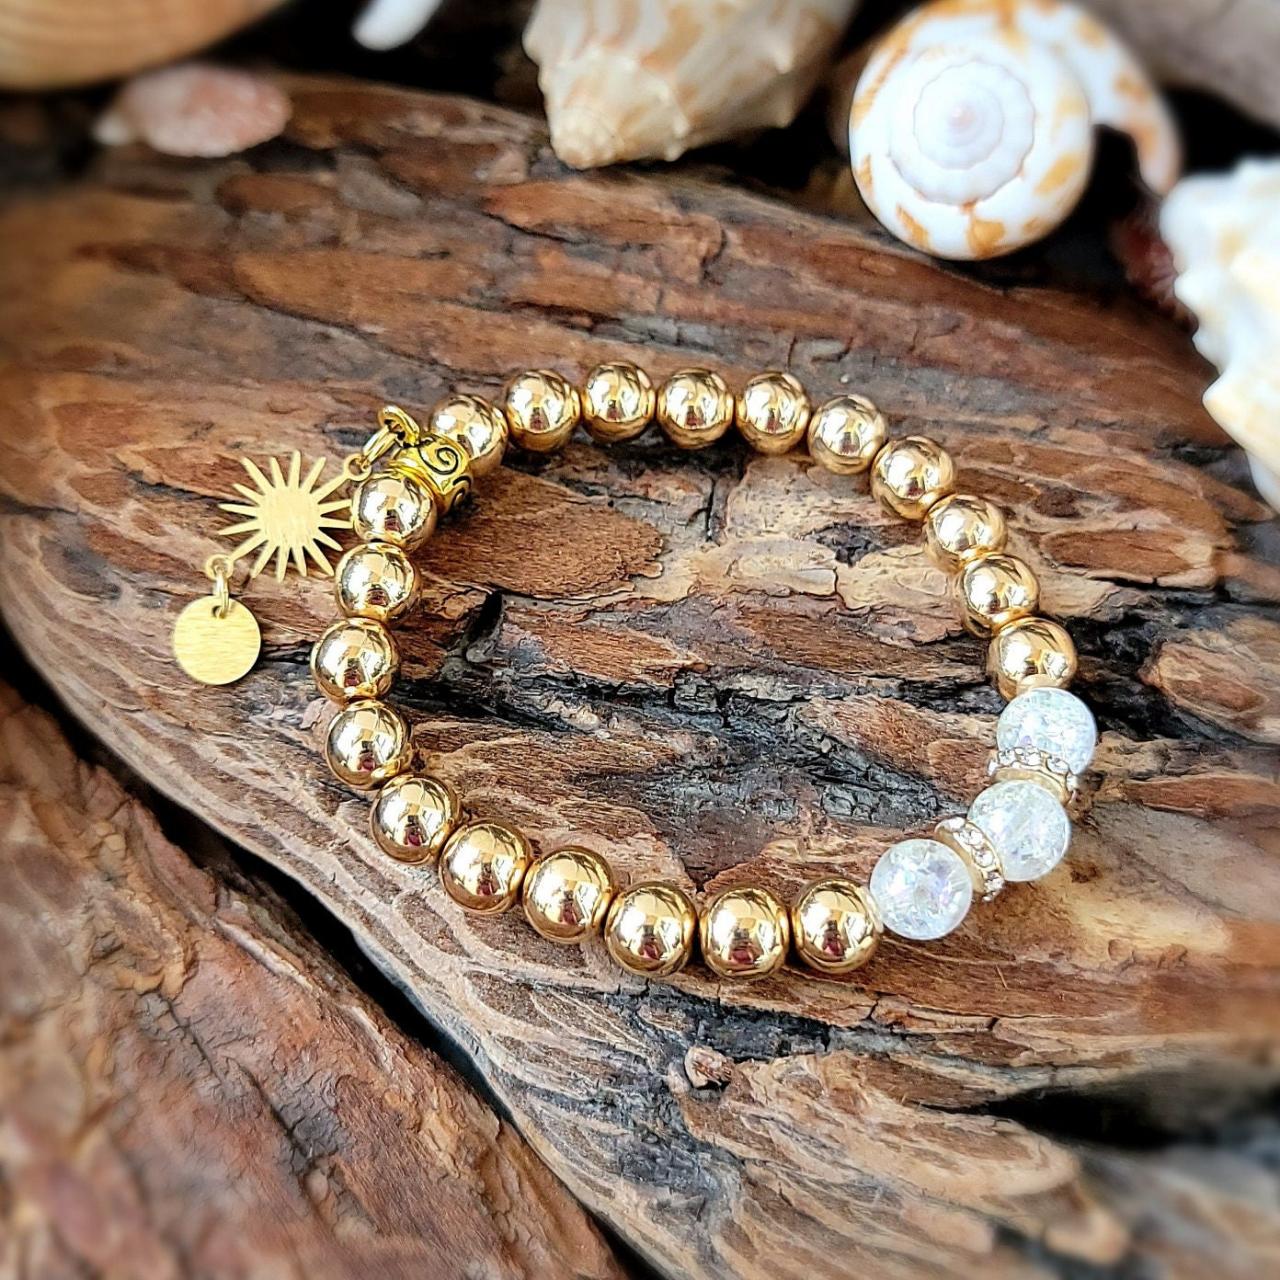 Rainbow Crystal Crackle Quartz Natural Healing Gemstone Bracelet With Swarovski Crystals And Gold Plated Beads